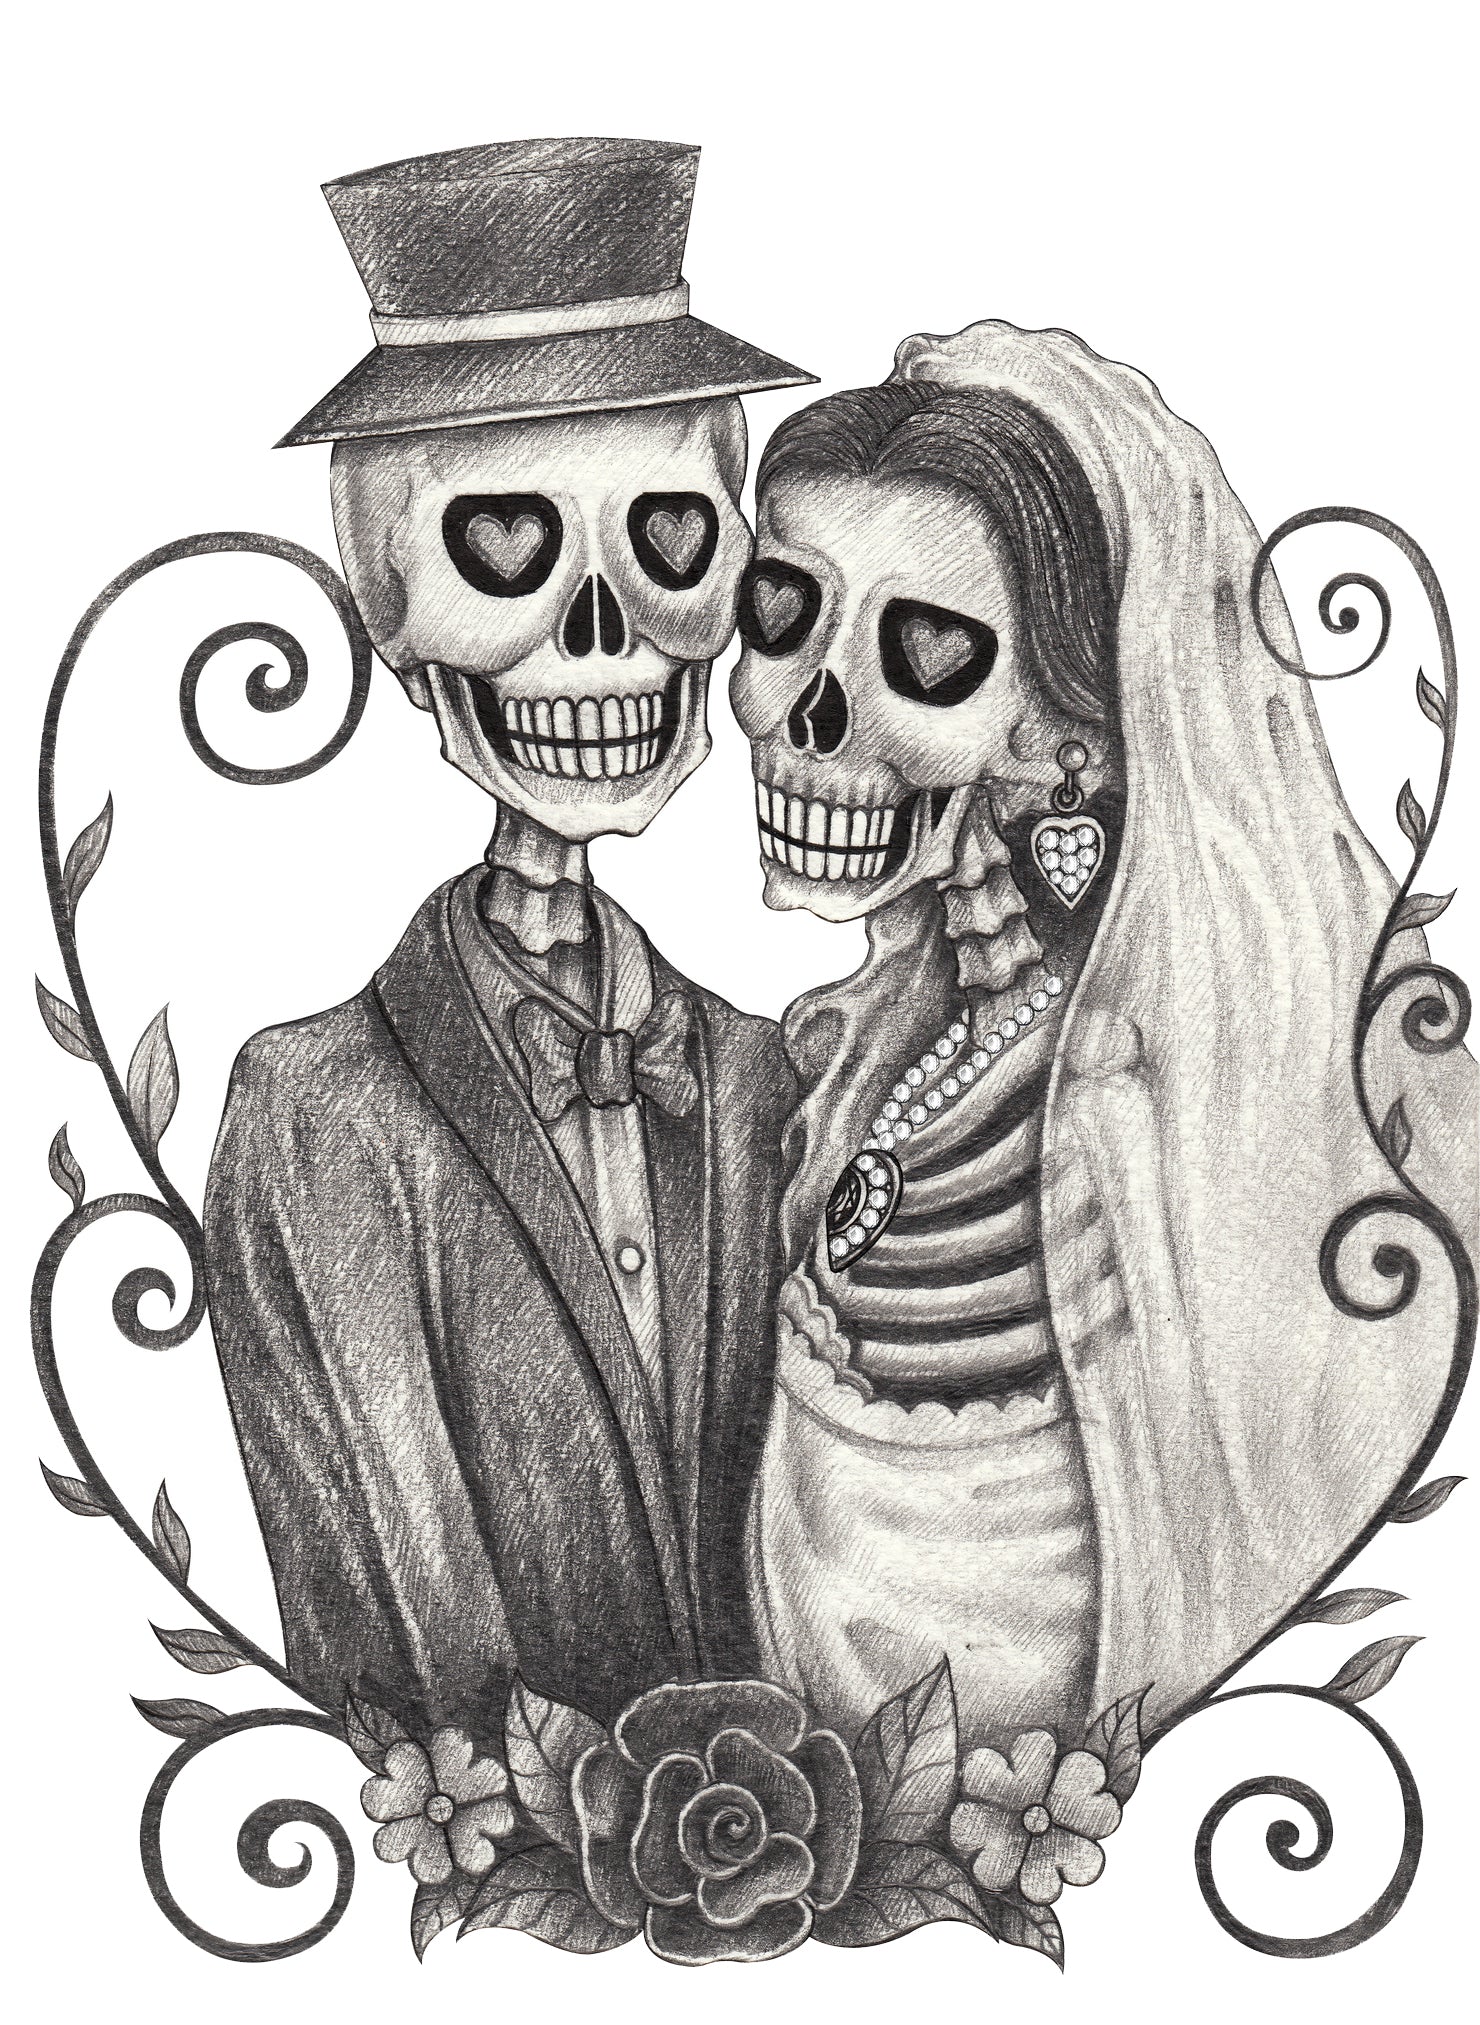 Pencil Sketch Bride and Groom with Swirls #2 Vinyl Decal Sticker